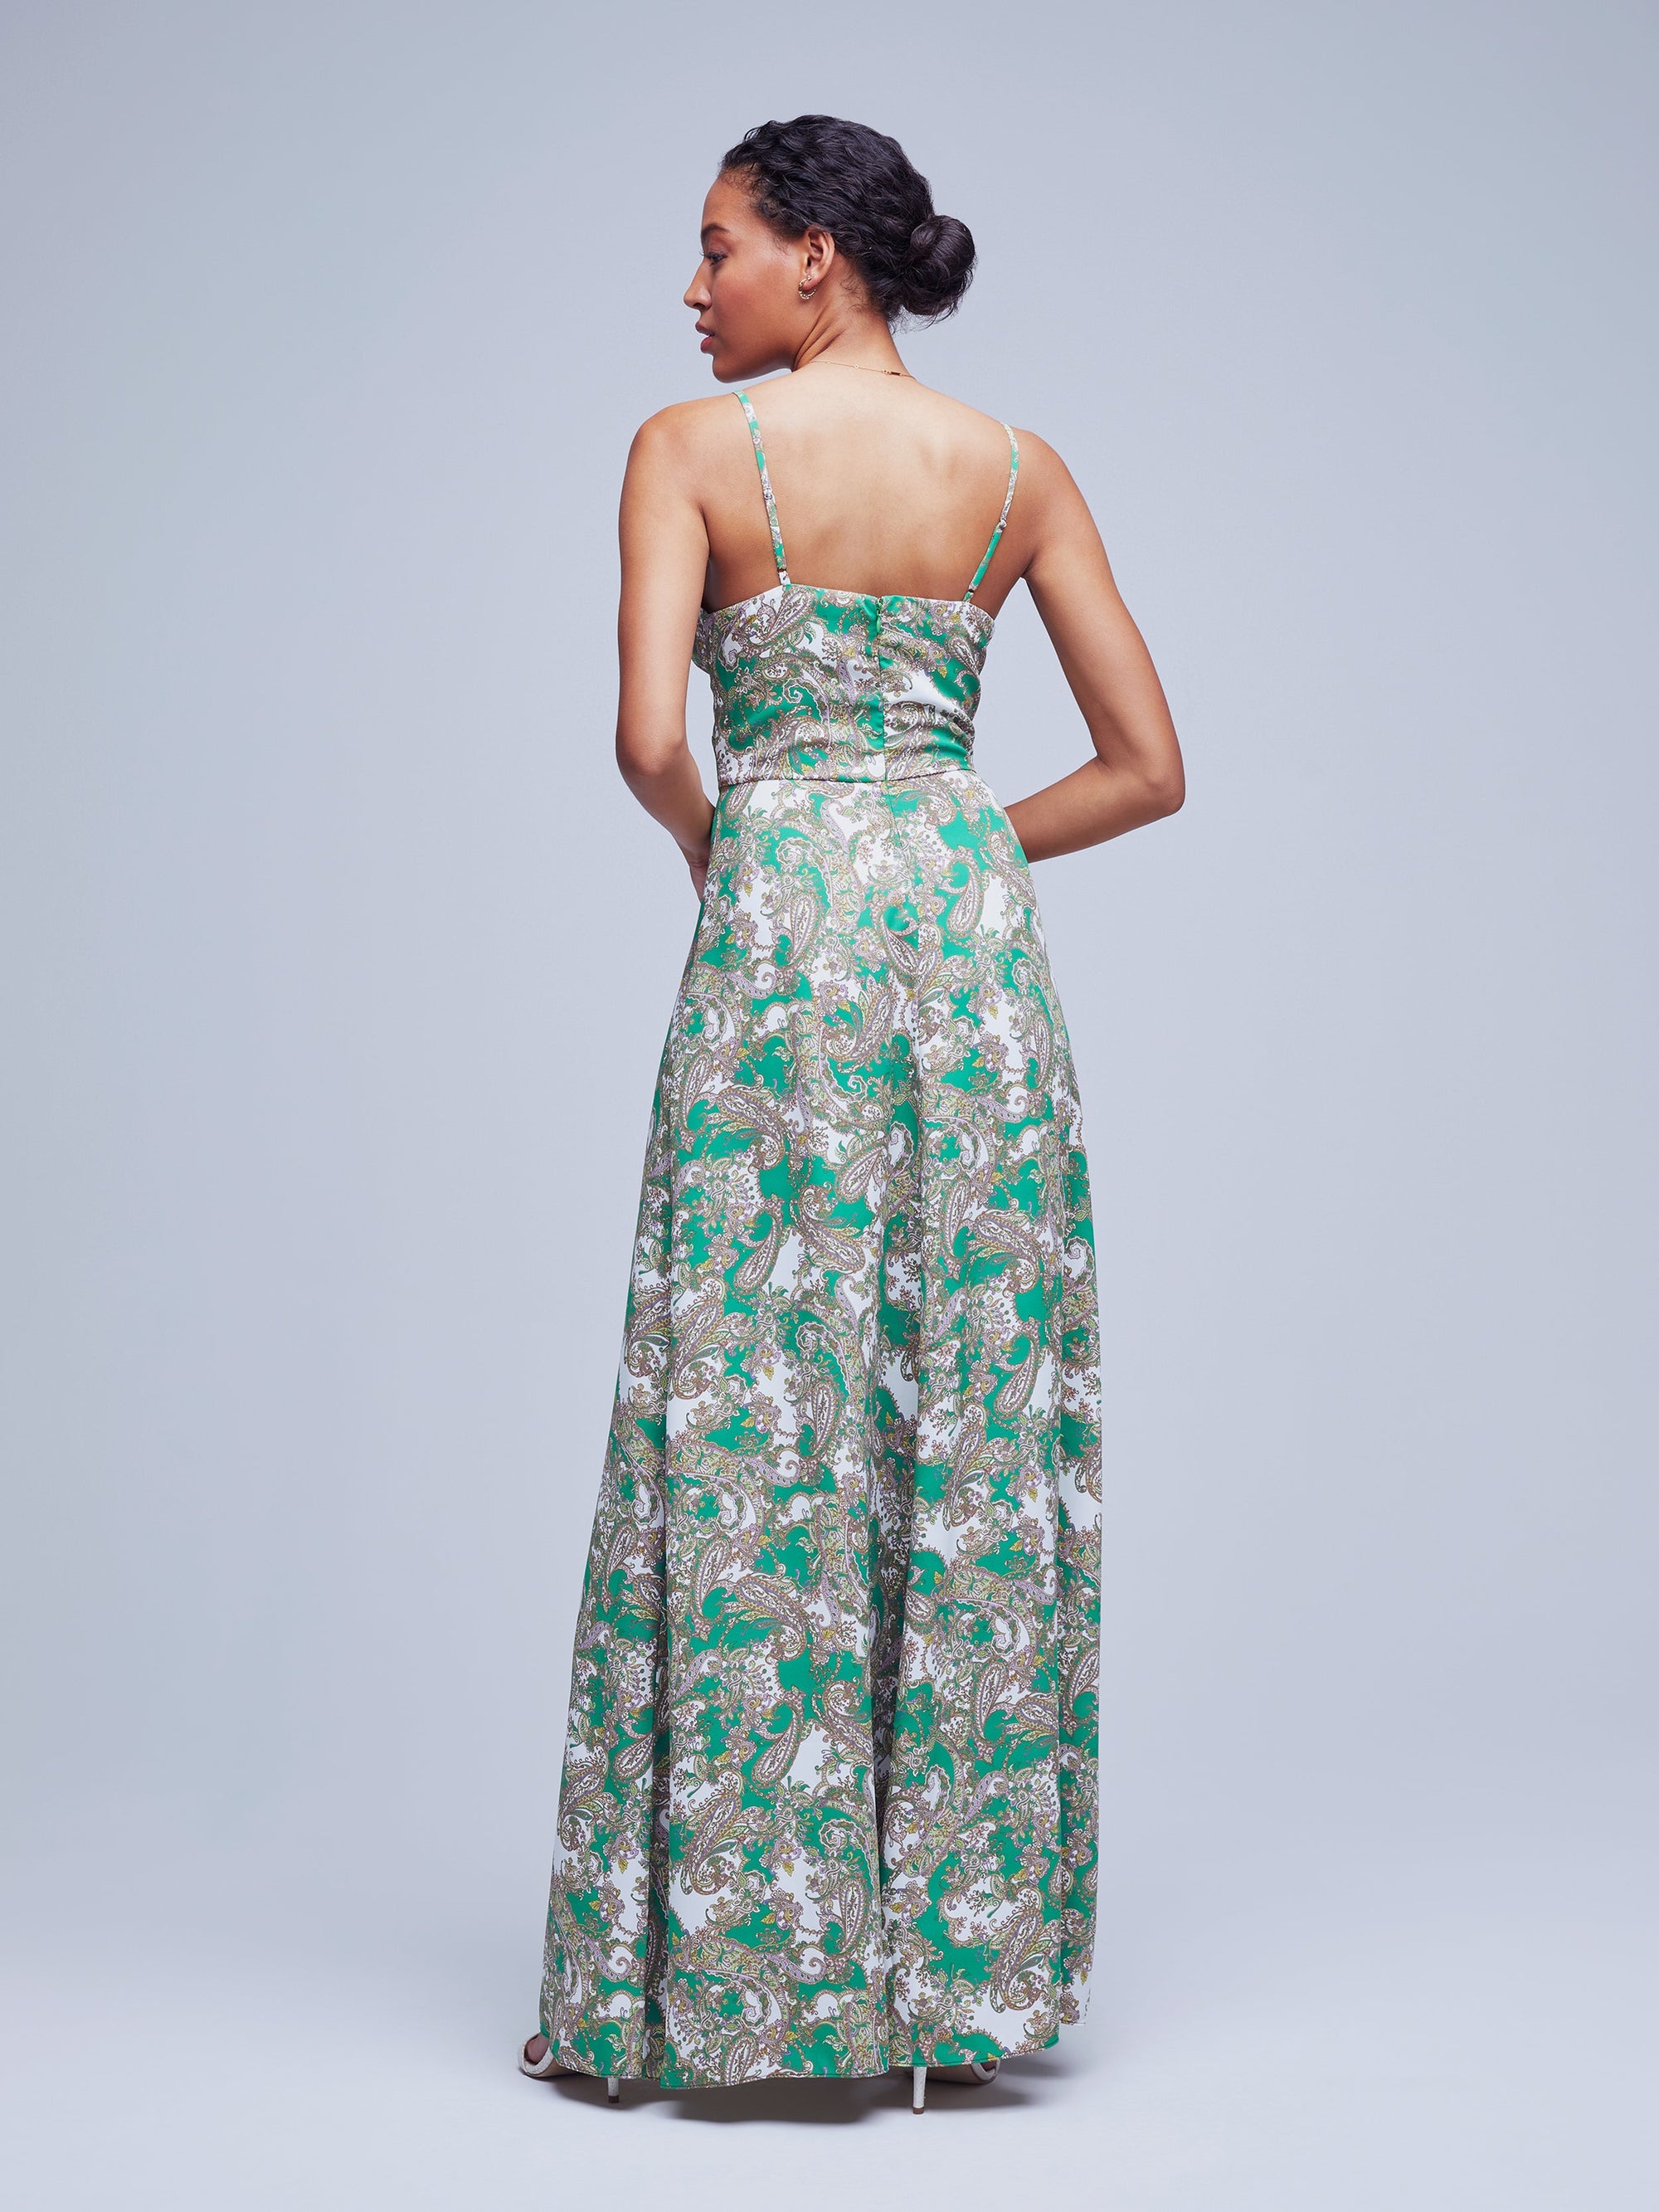 Porter Twisted Front Dress in Grass Paisley Print by L'AGENCE